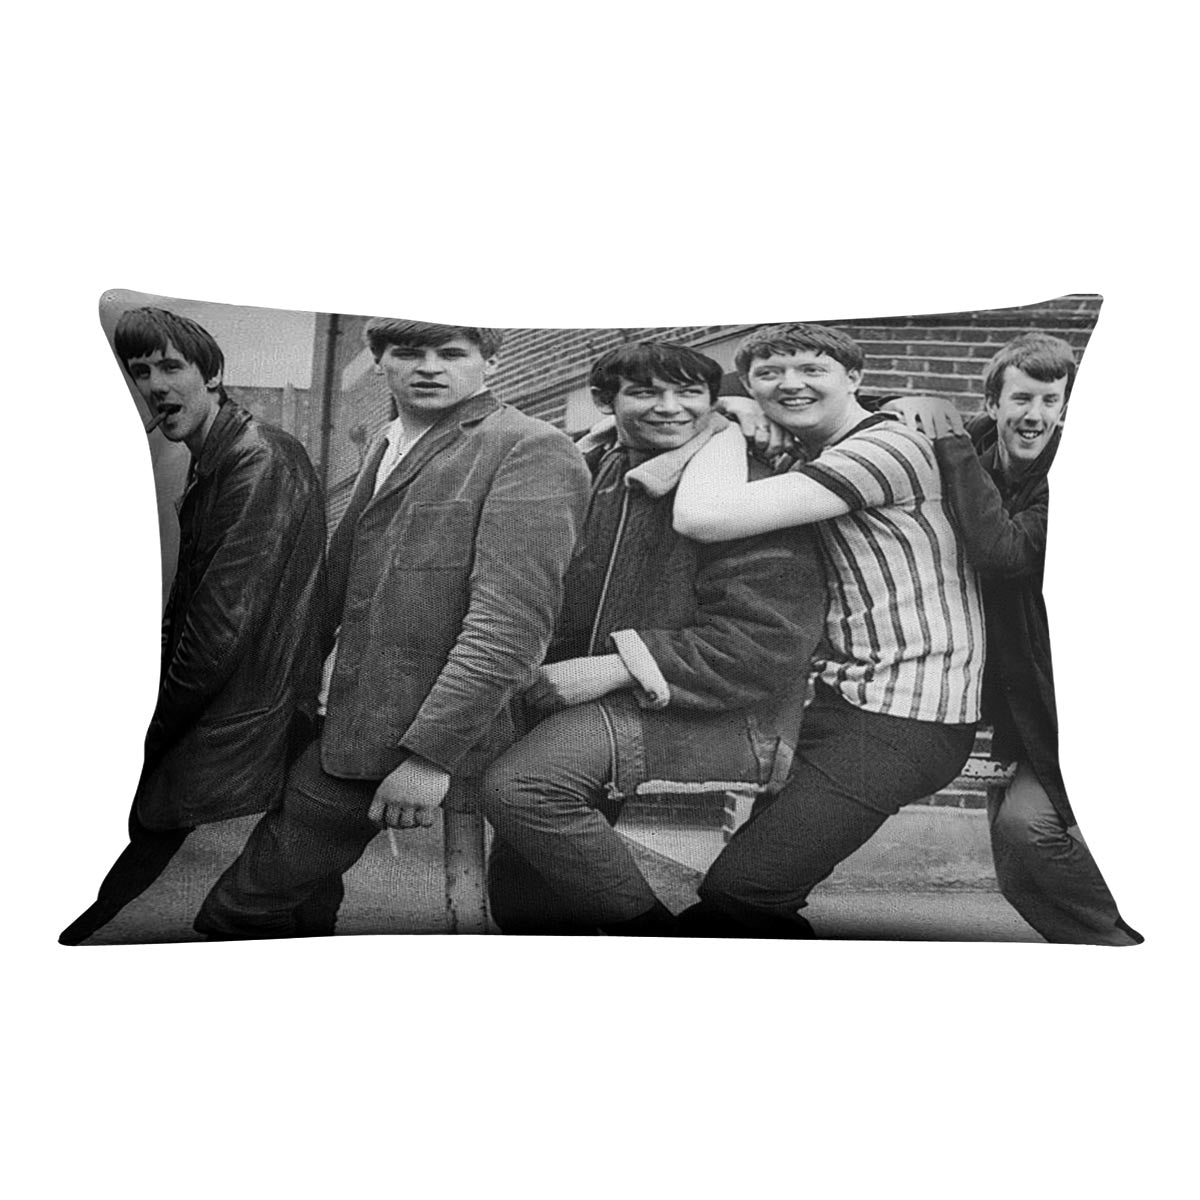 The Animals in Londn Cushion